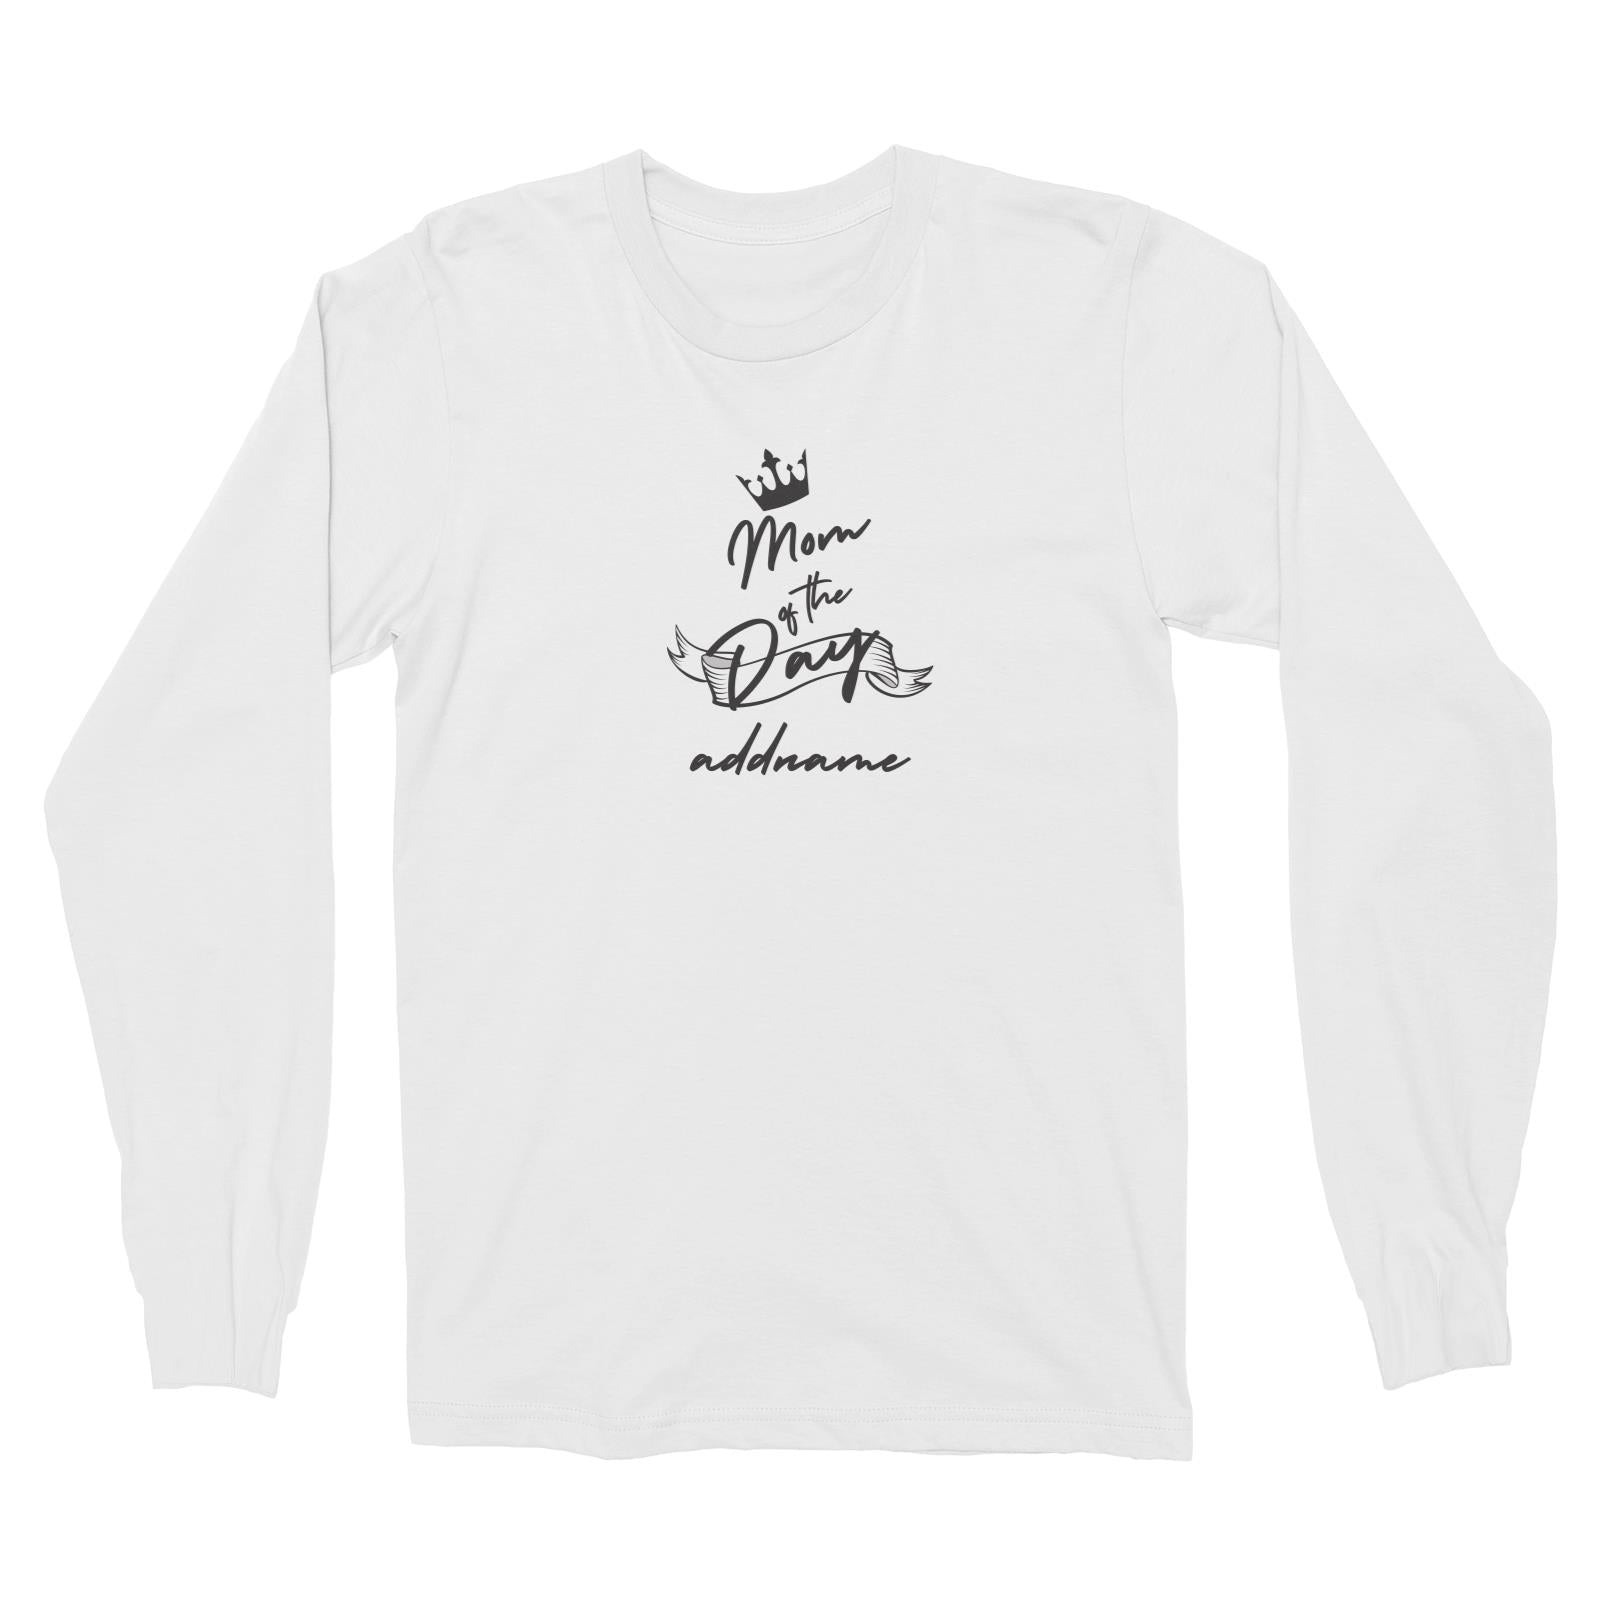 Birthday Typography Mom Of The Day Addname Long Sleeve Unisex T-Shirt